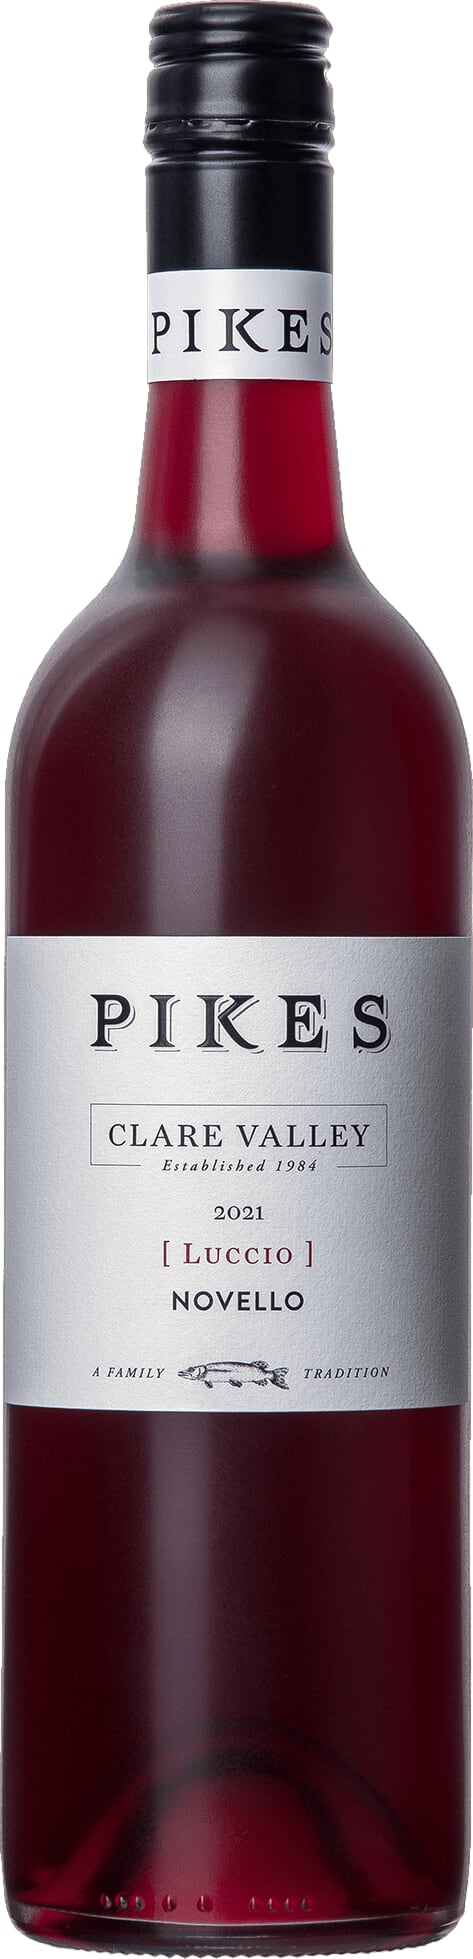 Pikes Luccio Novello 2022 75cl - Buy Pikes Wines from GREAT WINES DIRECT wine shop